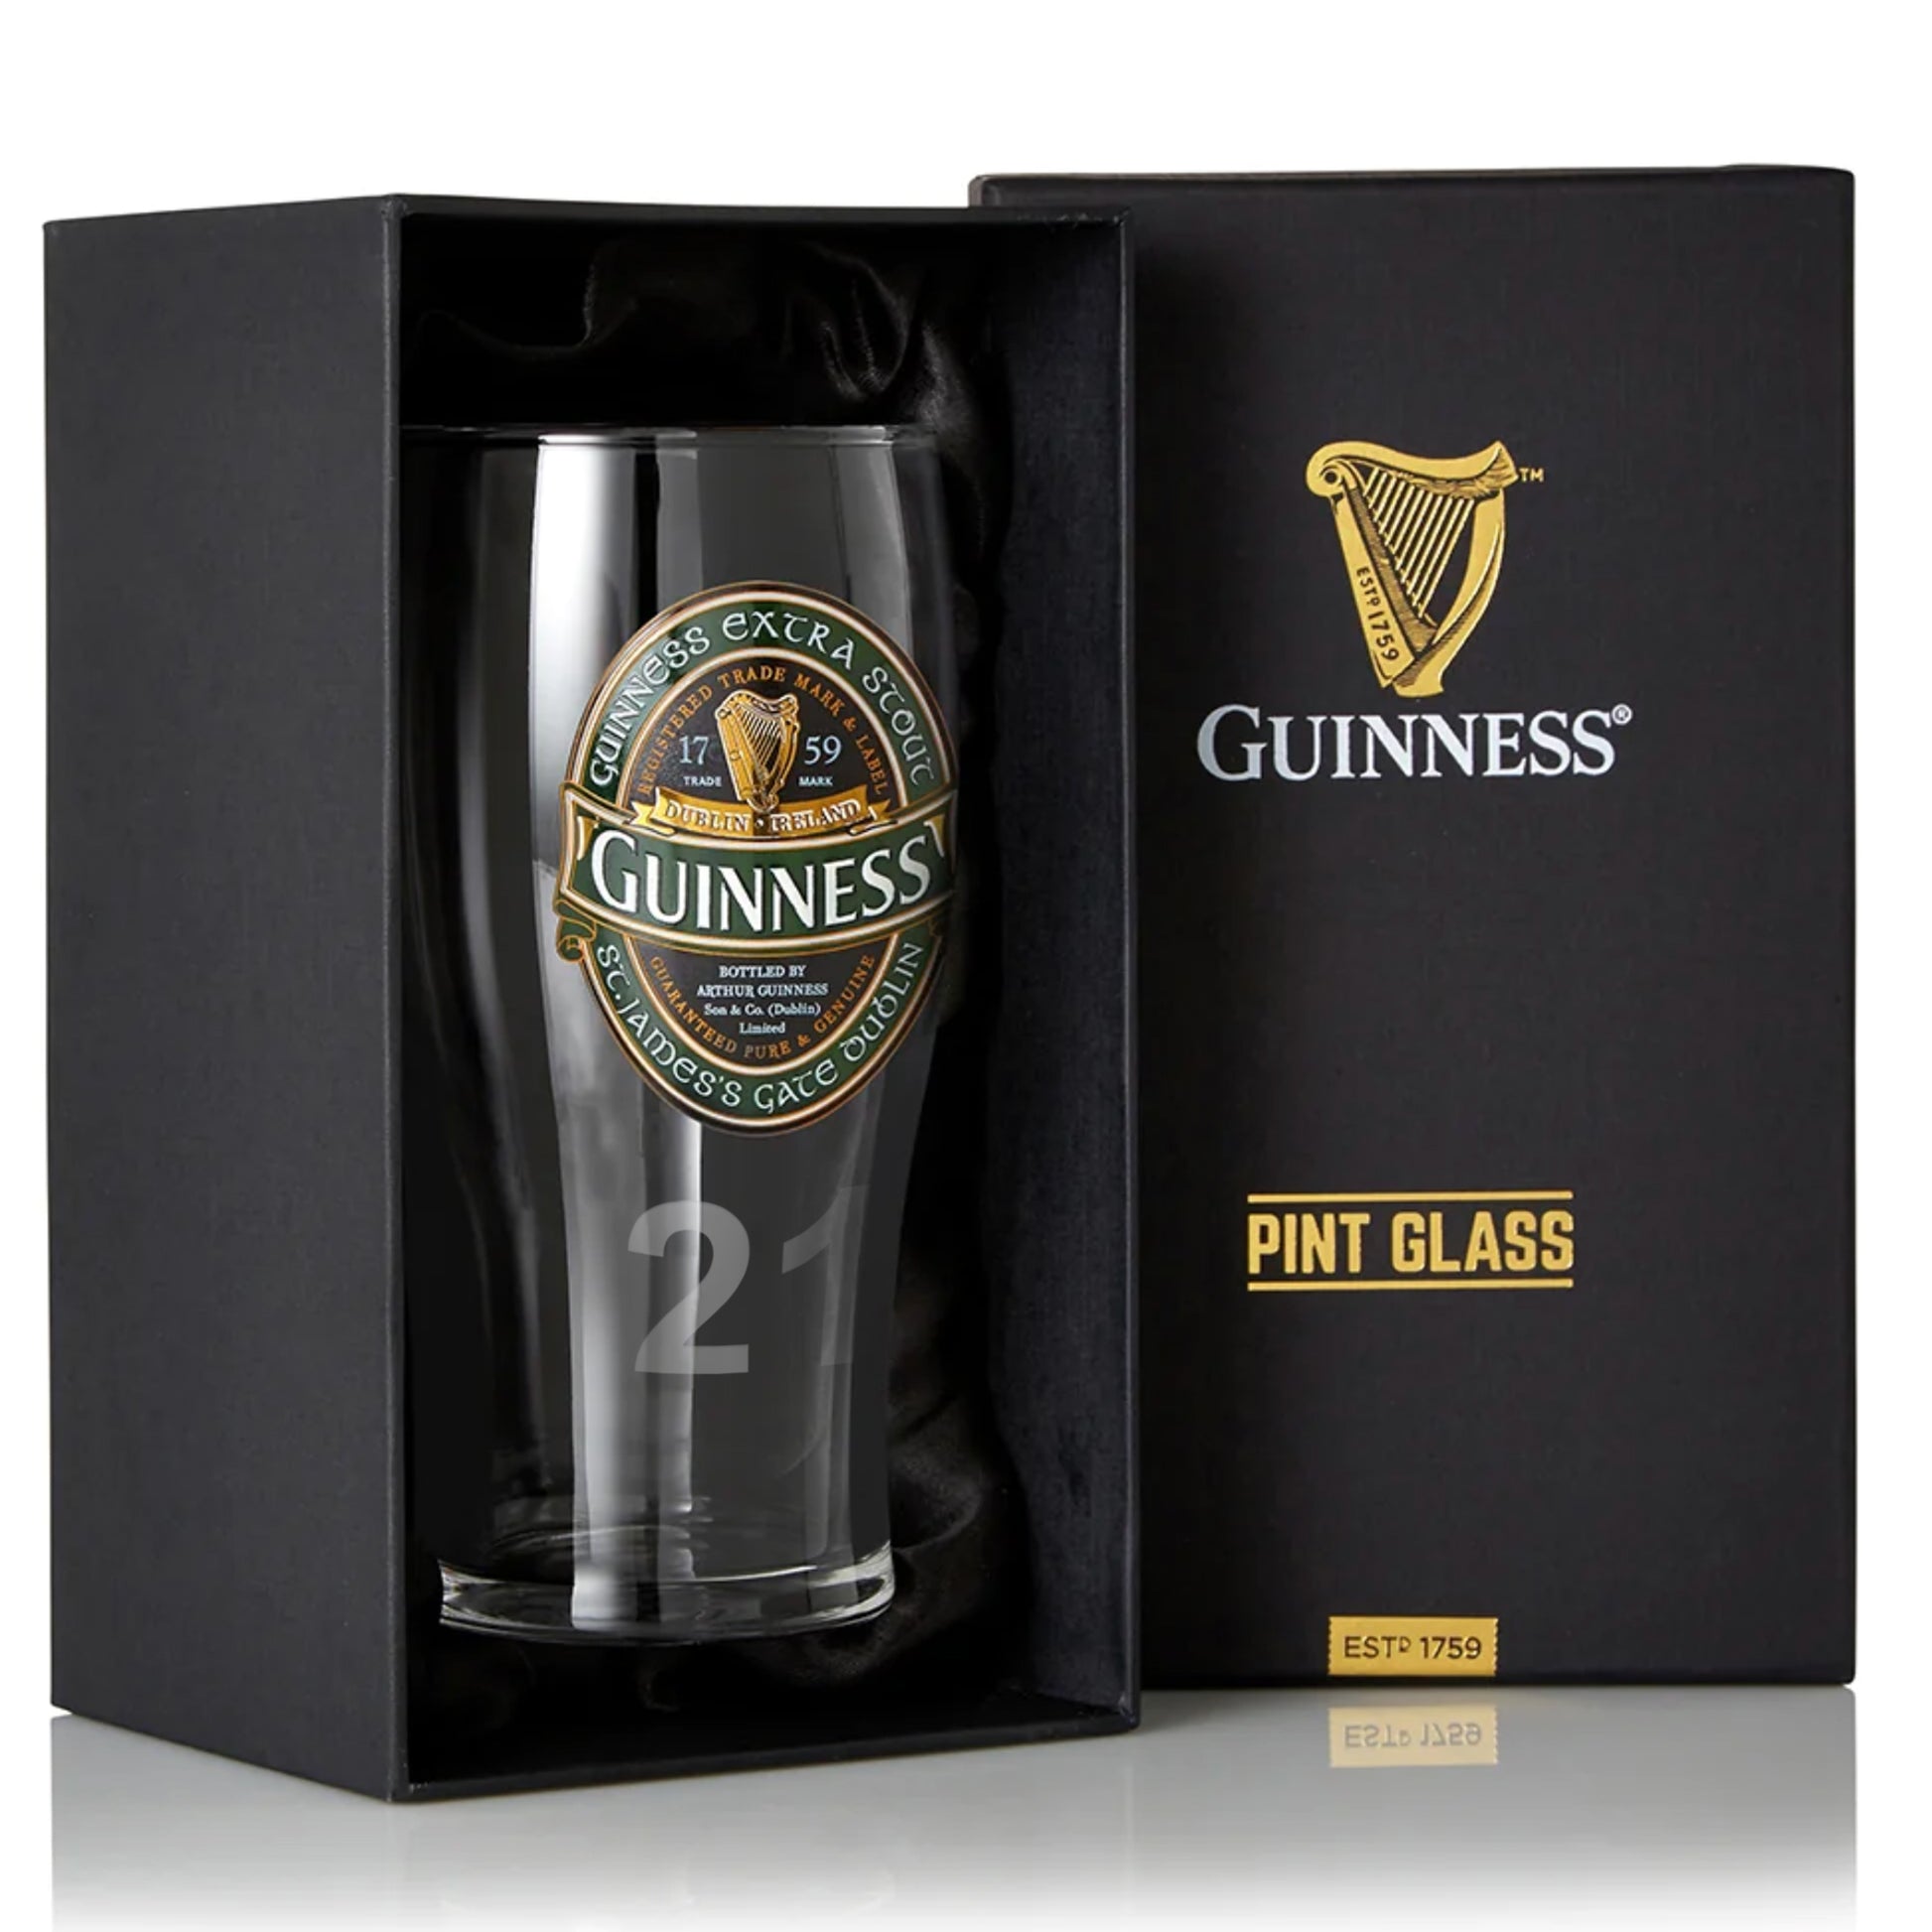 Add the keywords "Guinness Ireland Collection Pint Glass" and "Guinness" into the description below.